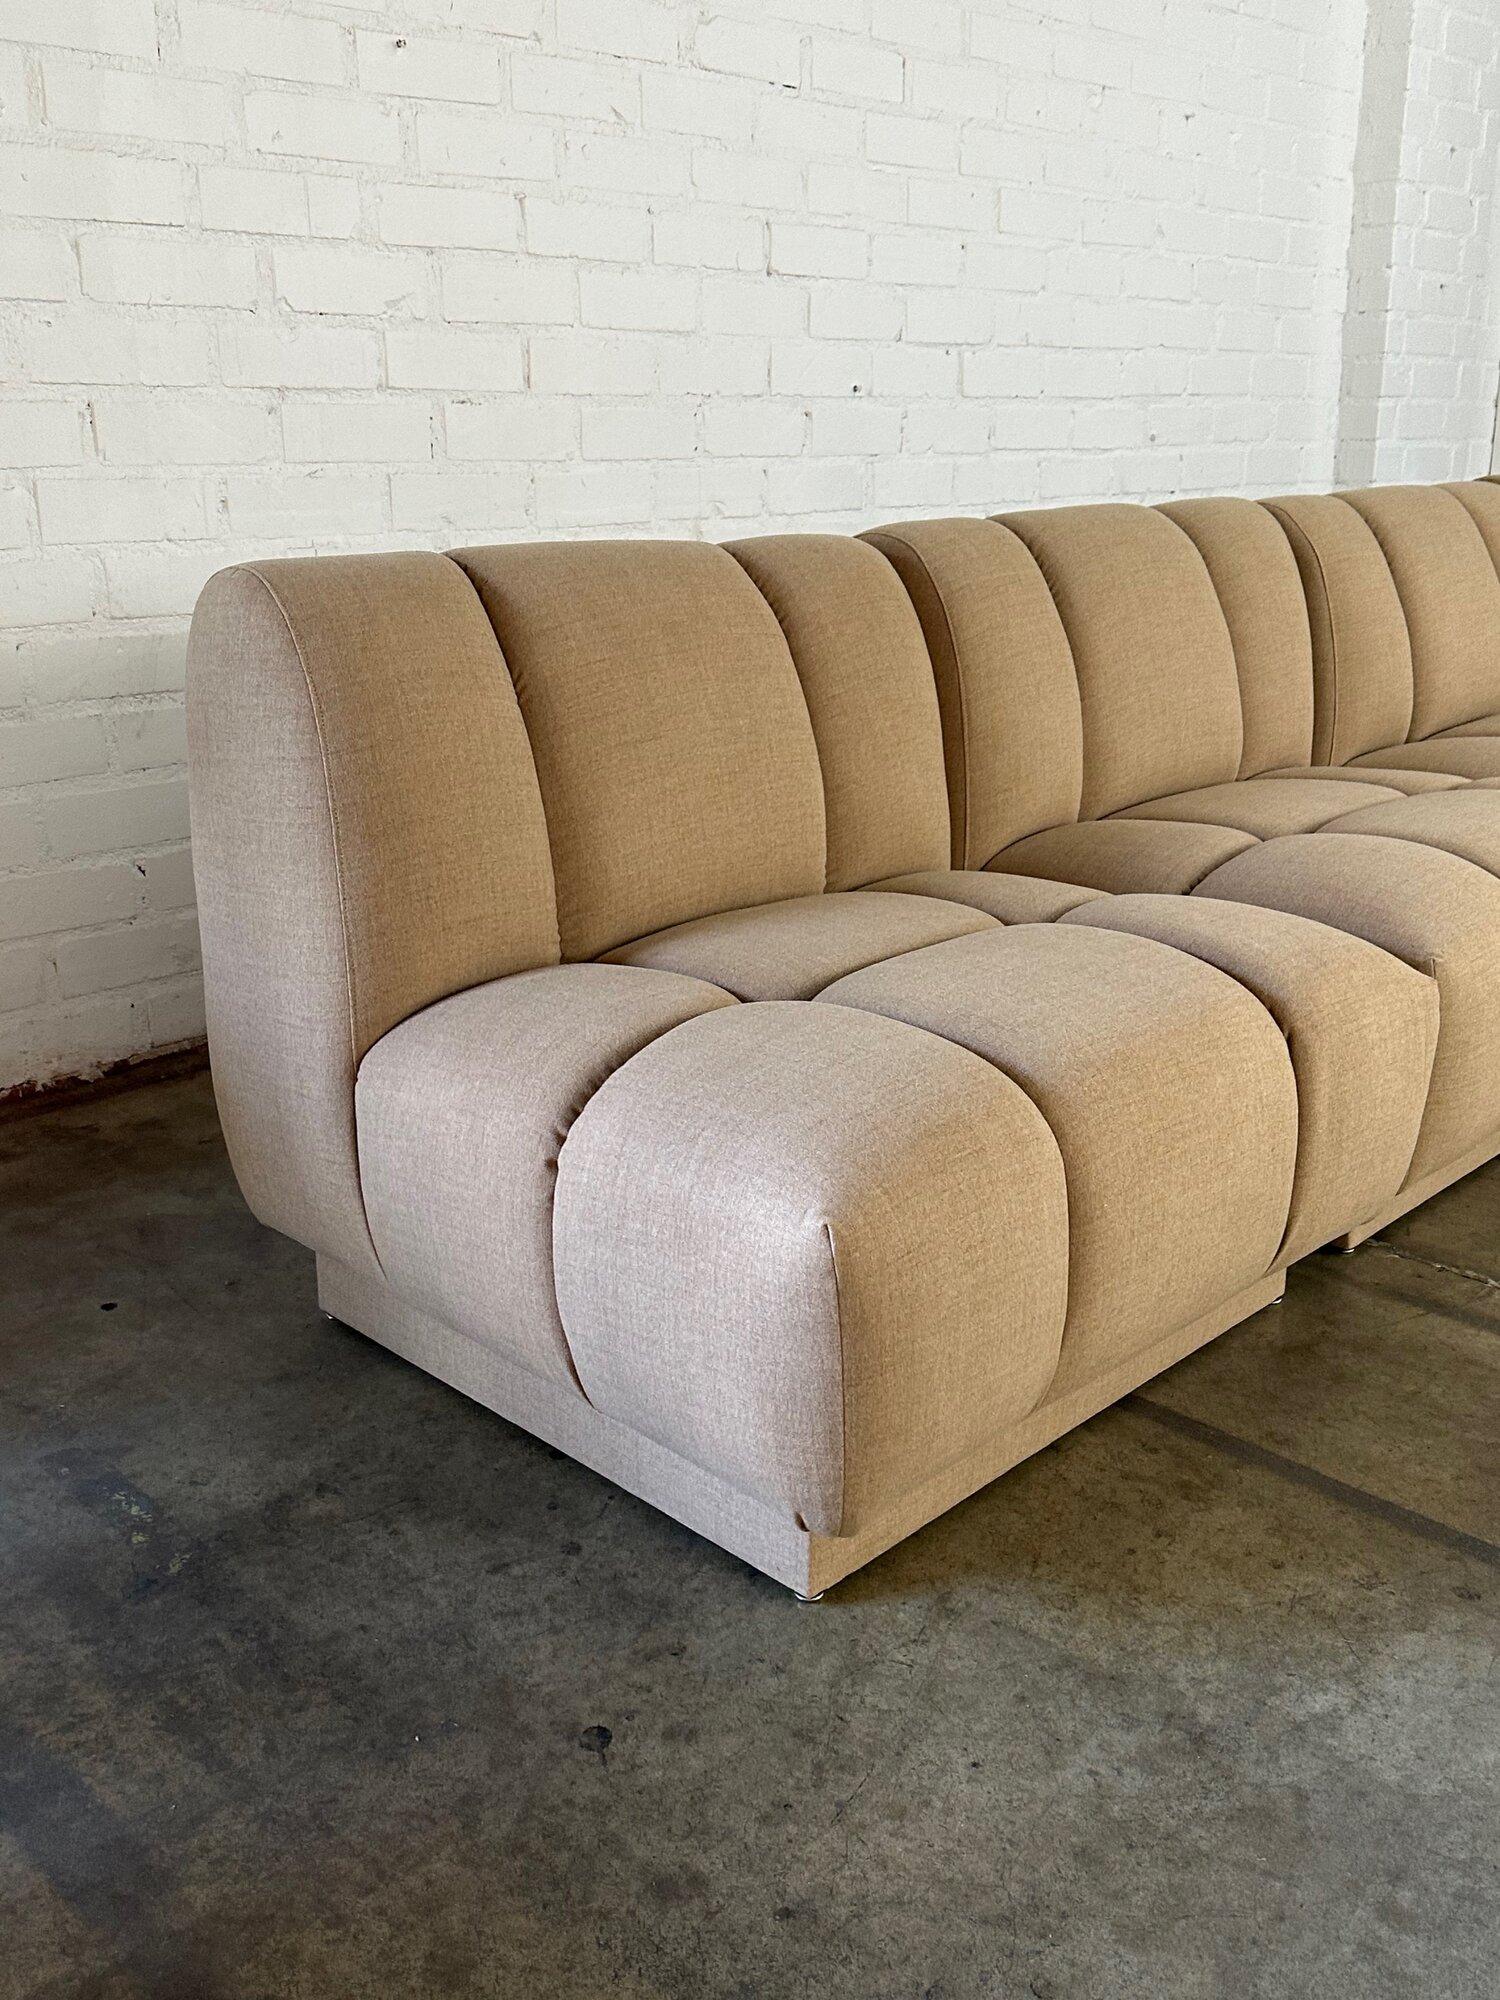 Fabric Tetris Modular Seating - sold separately For Sale